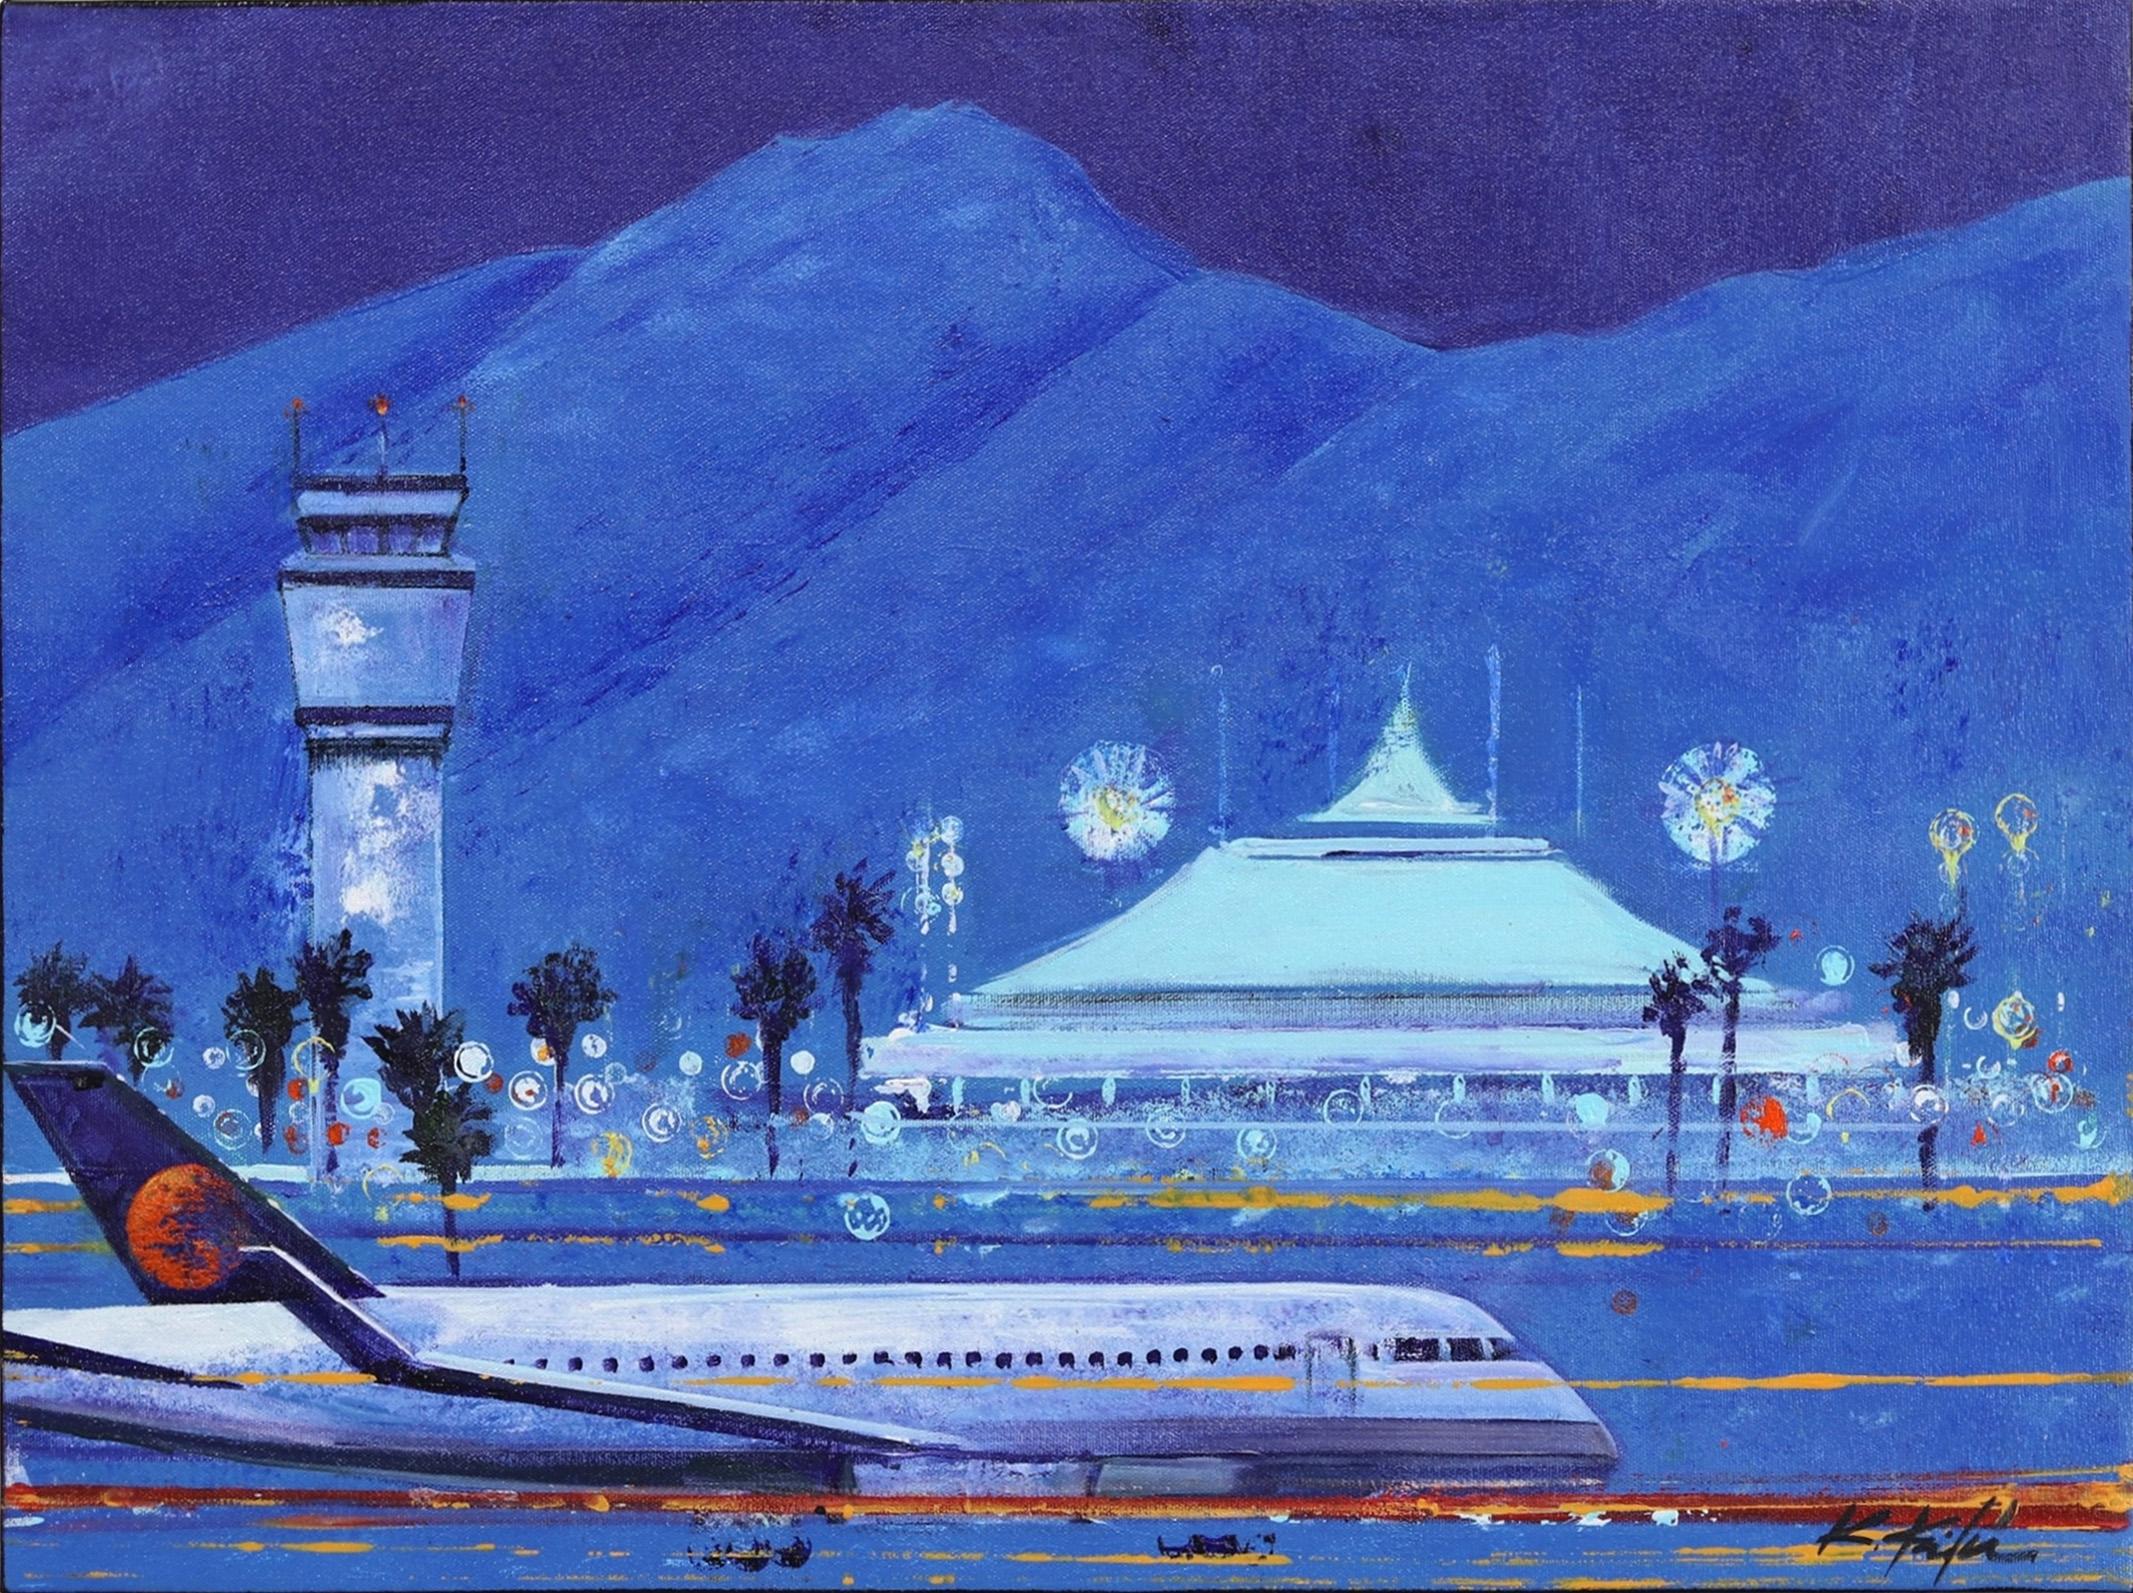 Palm Springs Airport